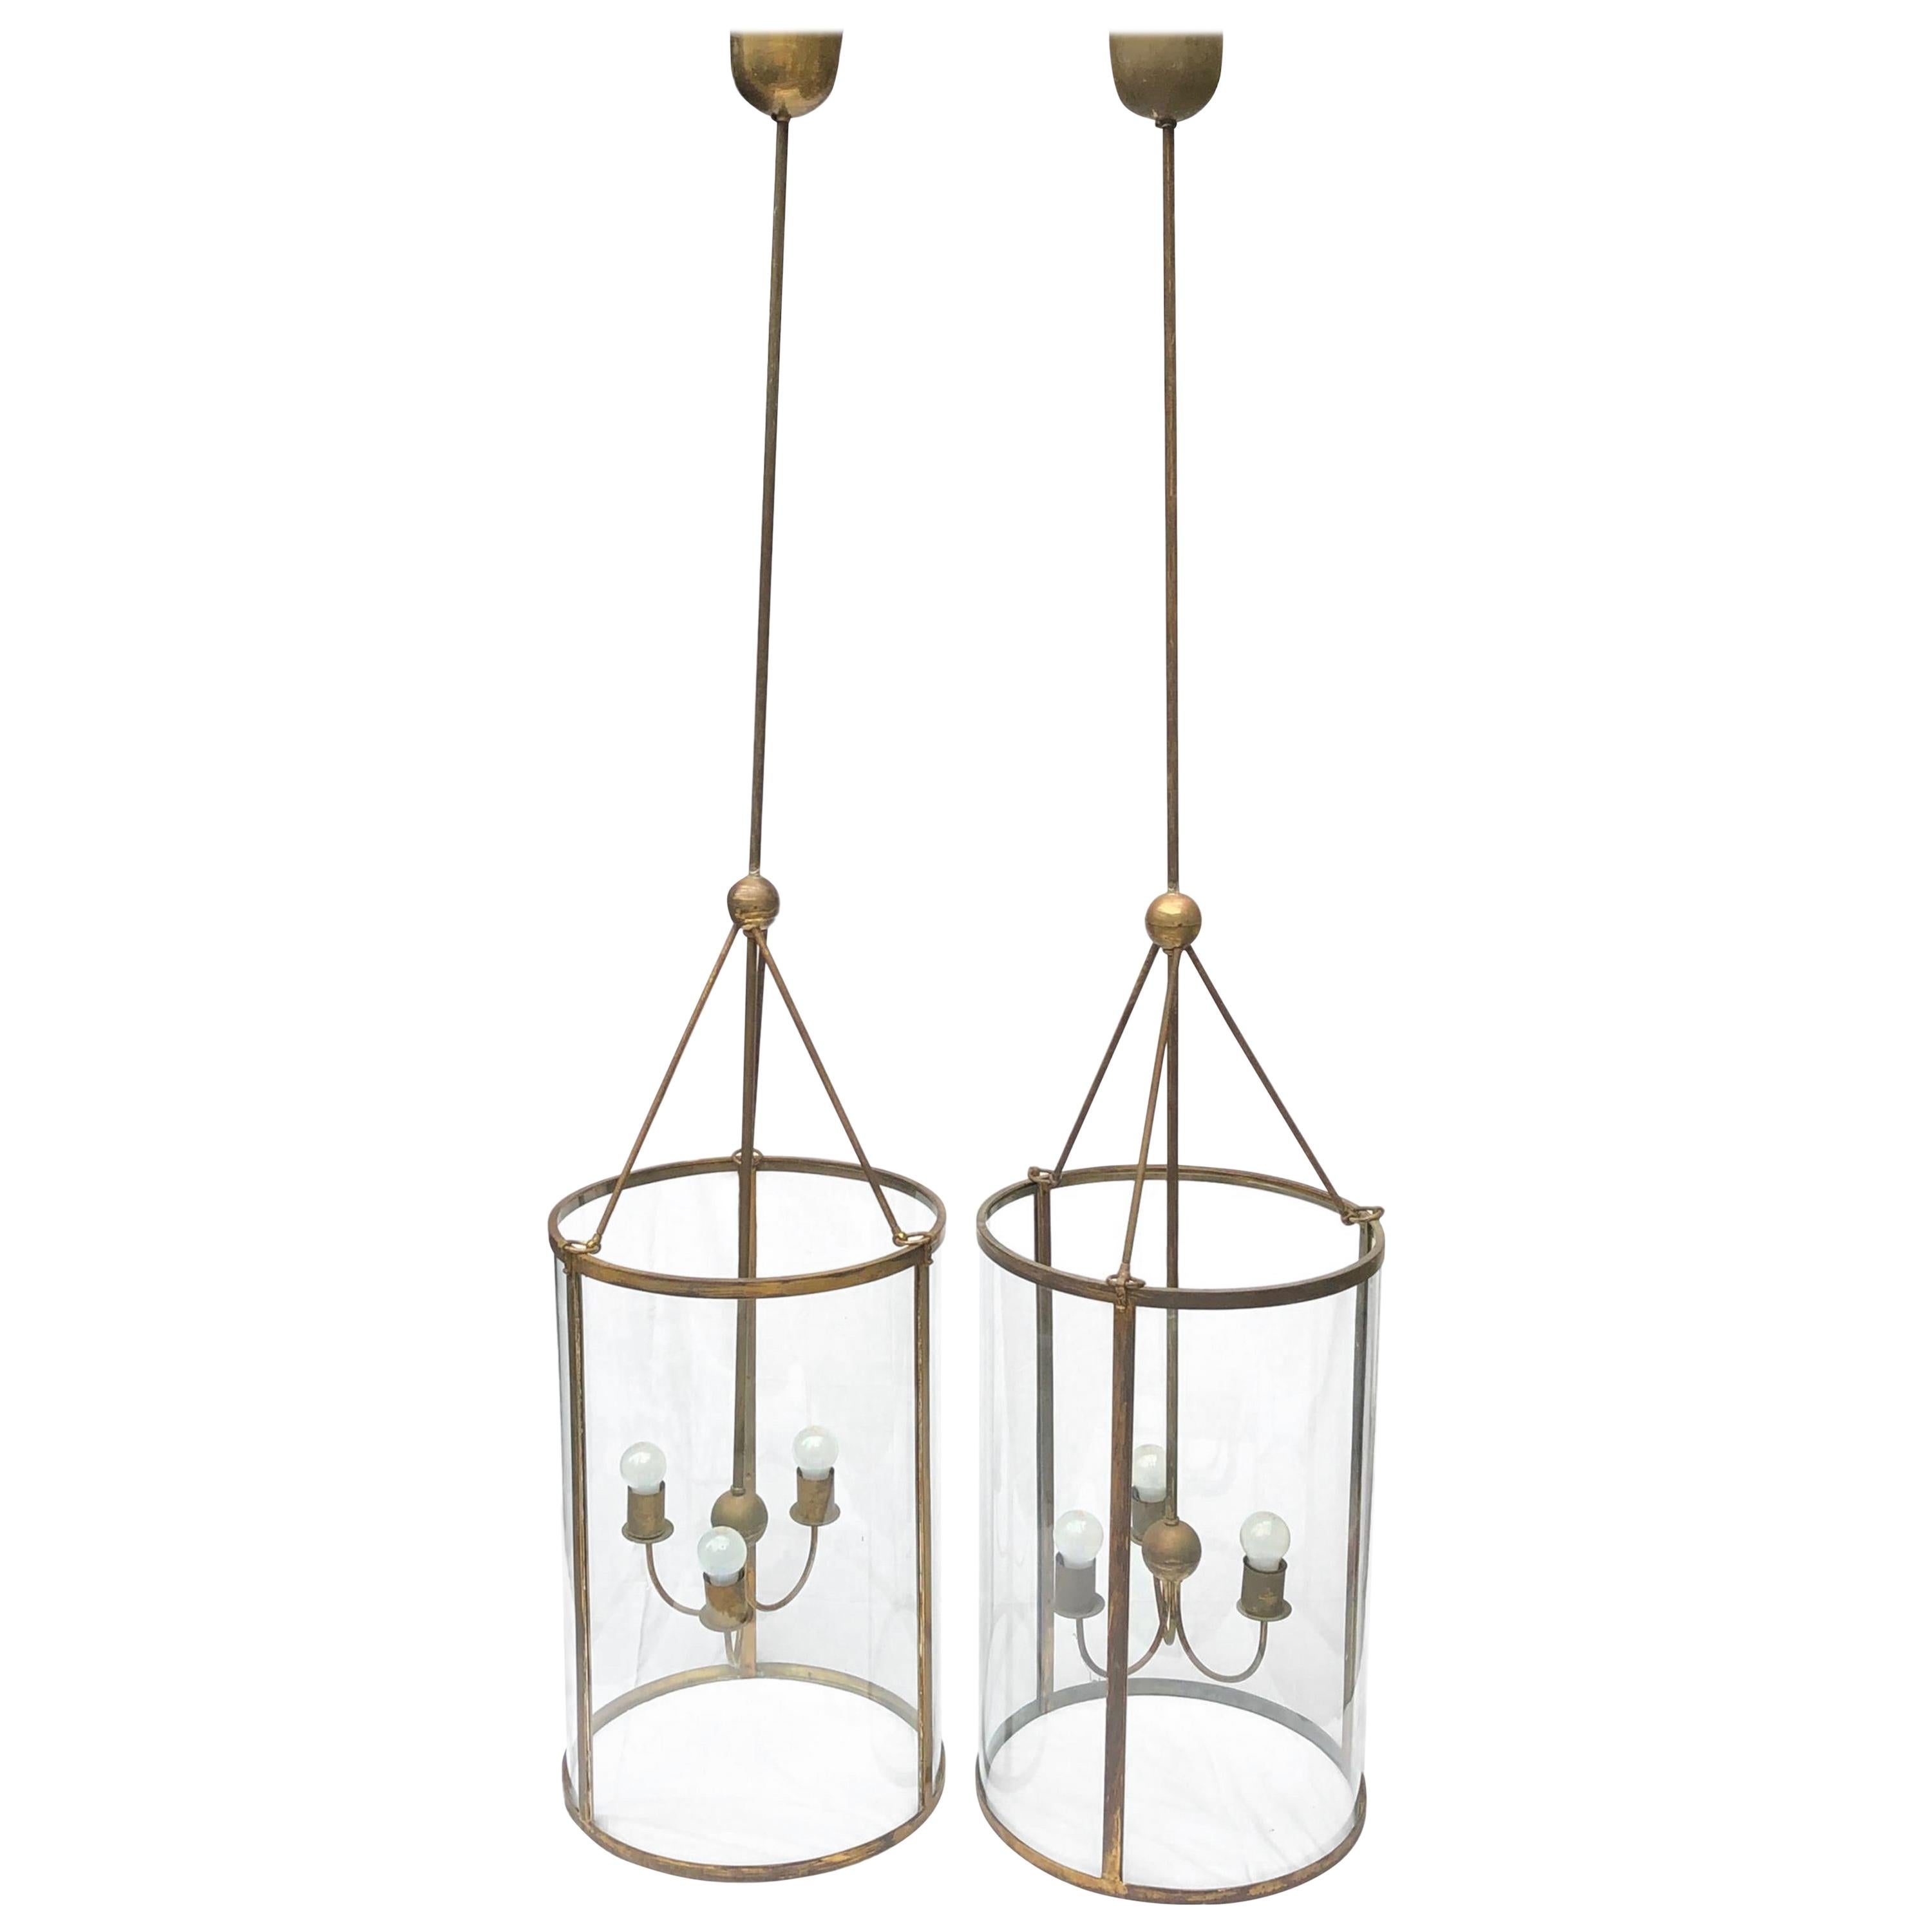 Pair of Monumental Size Brass and Glass Art Deco Chandeliers Vintage, German